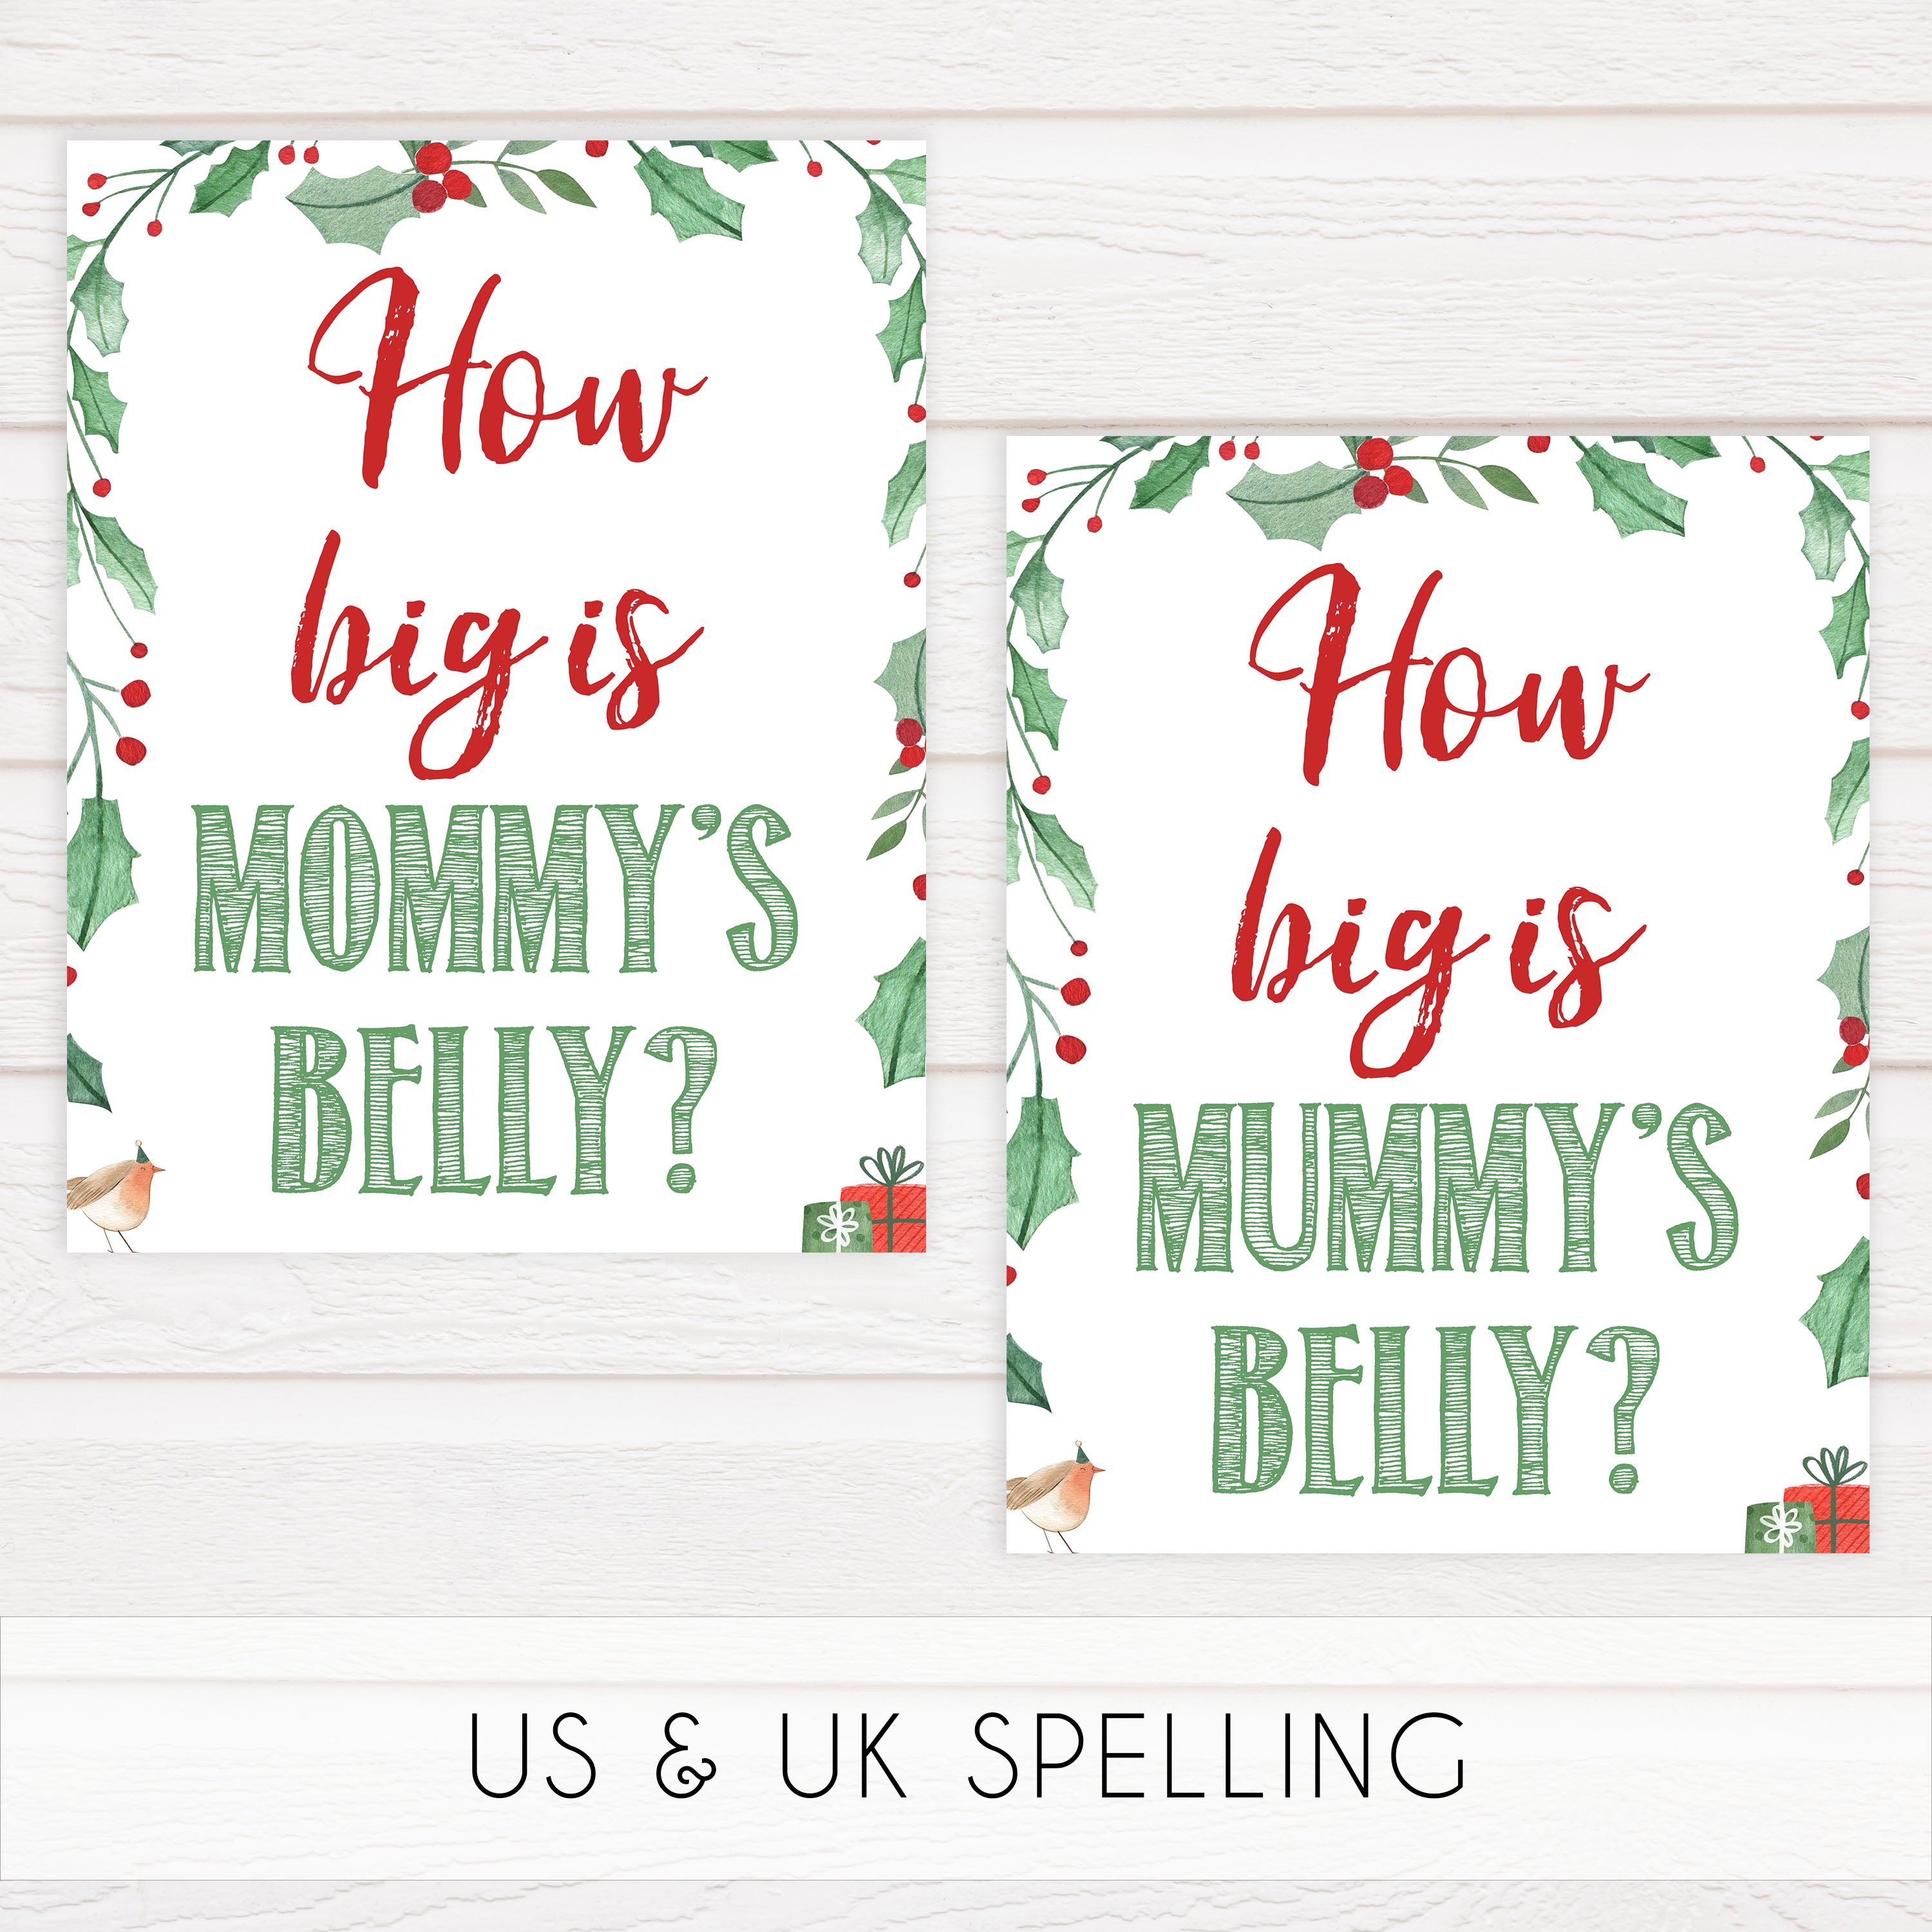 Christmas baby shower games, how big is mommys belly, festive baby shower games, best baby shower games, top 10 baby games, baby shower ideas, baby shower games